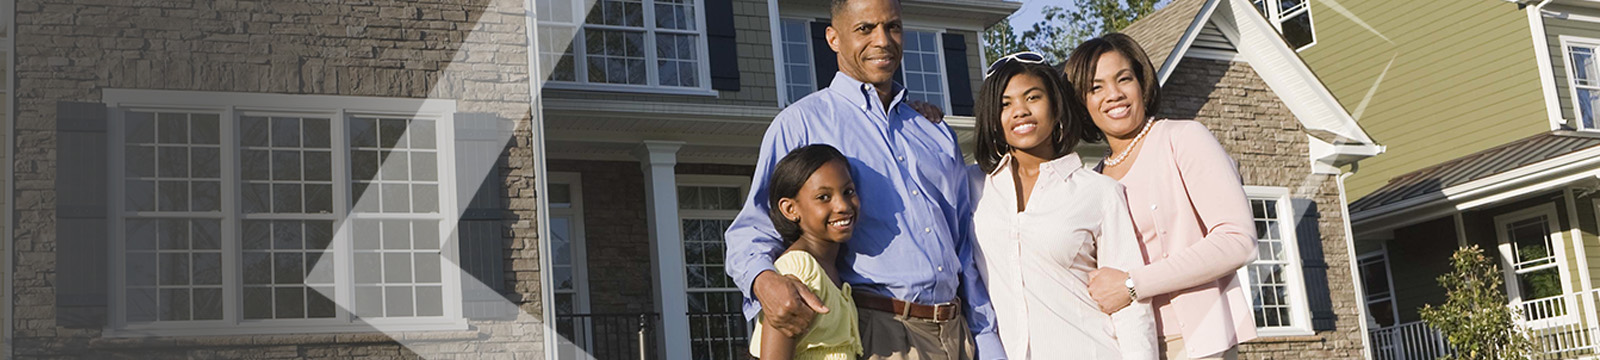 Home Equity Banner Image | Team One Credit Union